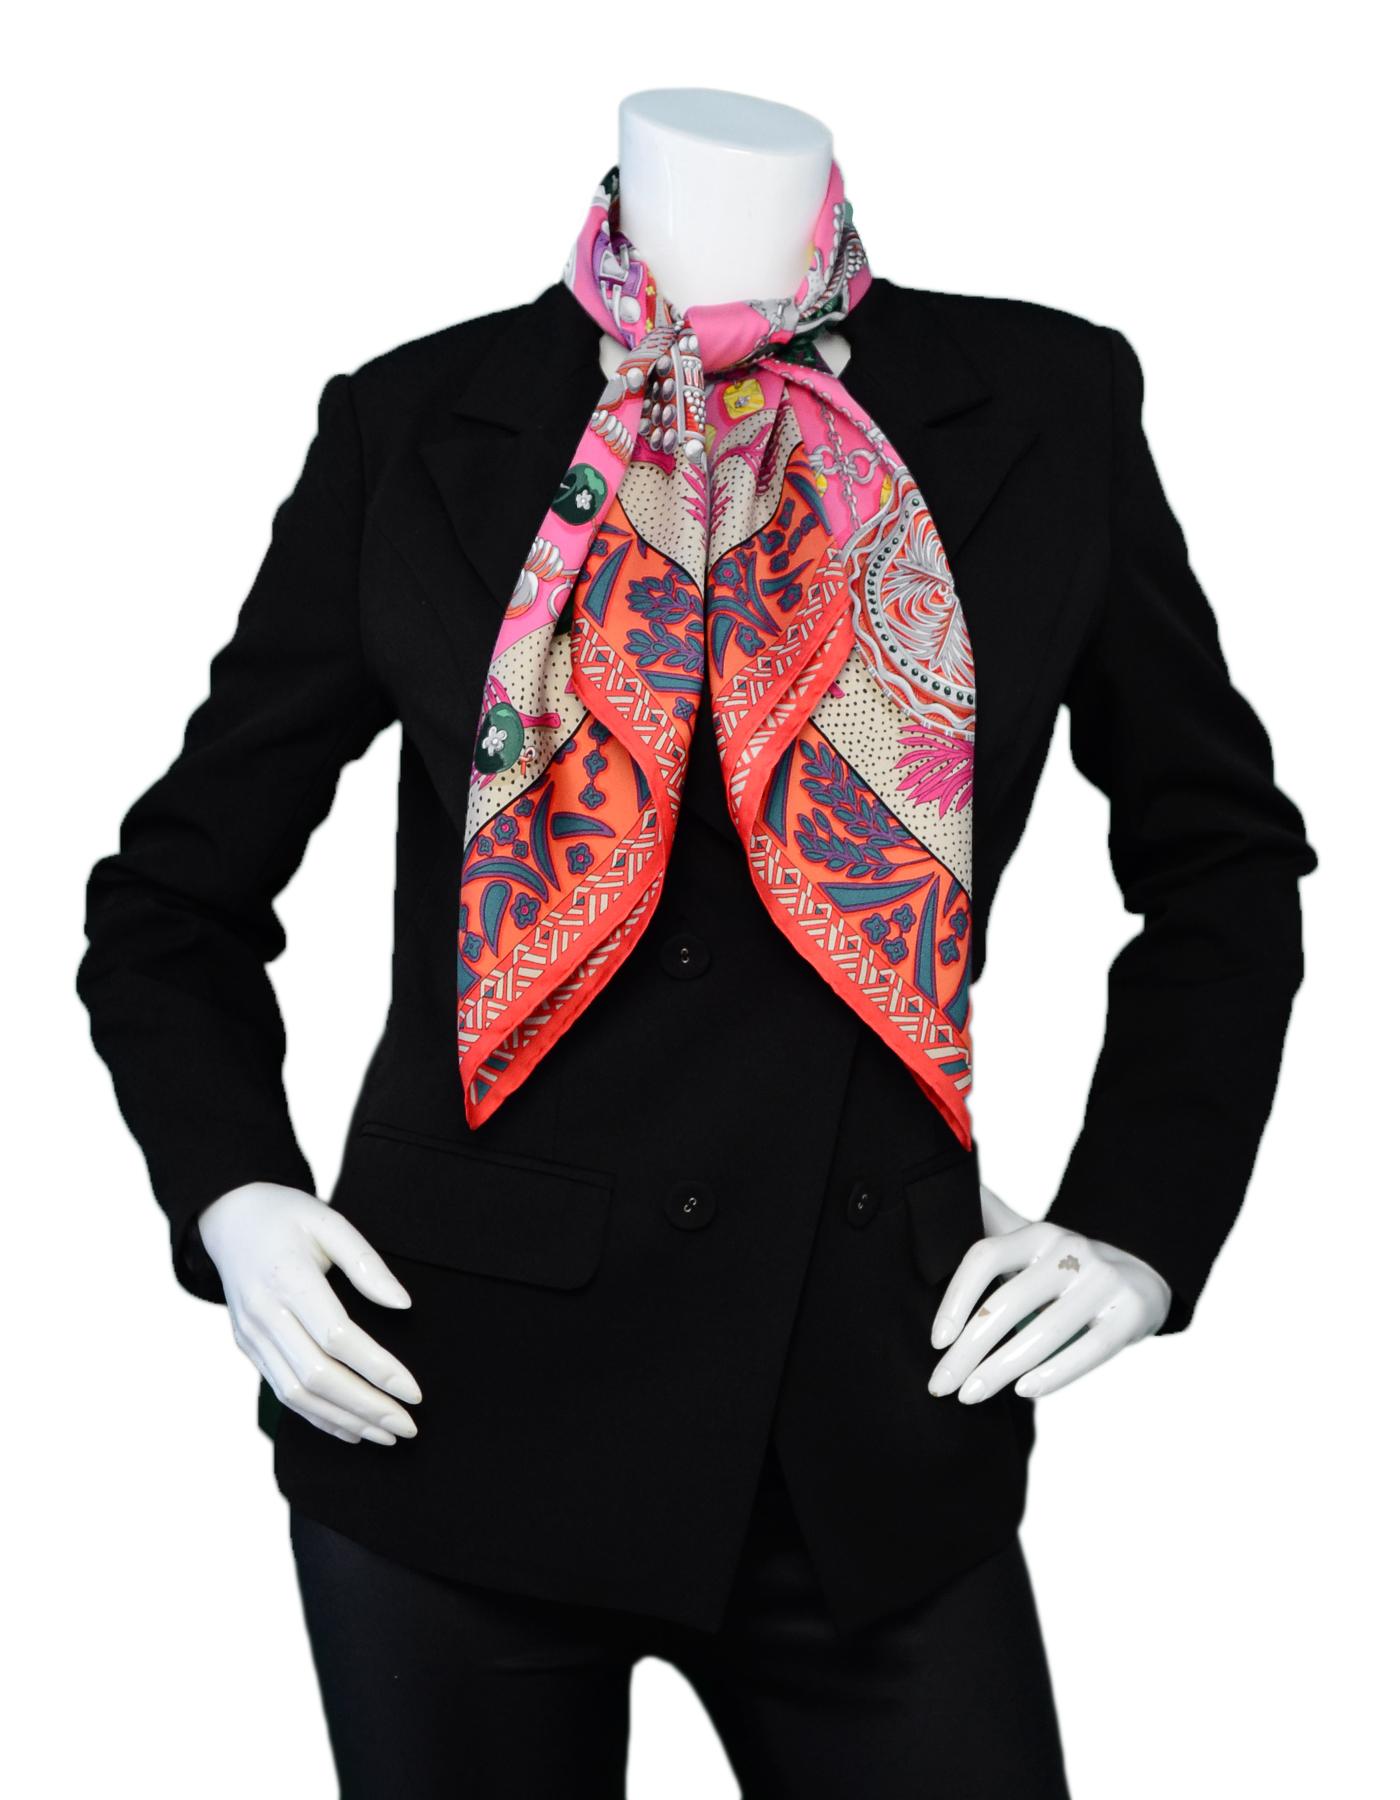 Hermes Pink/Multicolor Zenobie Reine de Palmyre Silk Scarf

Made In: France
Color: Pink, multicolor 
Materials: 100% silk
Overall Condition: Excellent pre-owned condition
Estimated Retail: $415 + tax
Measurements: 
34